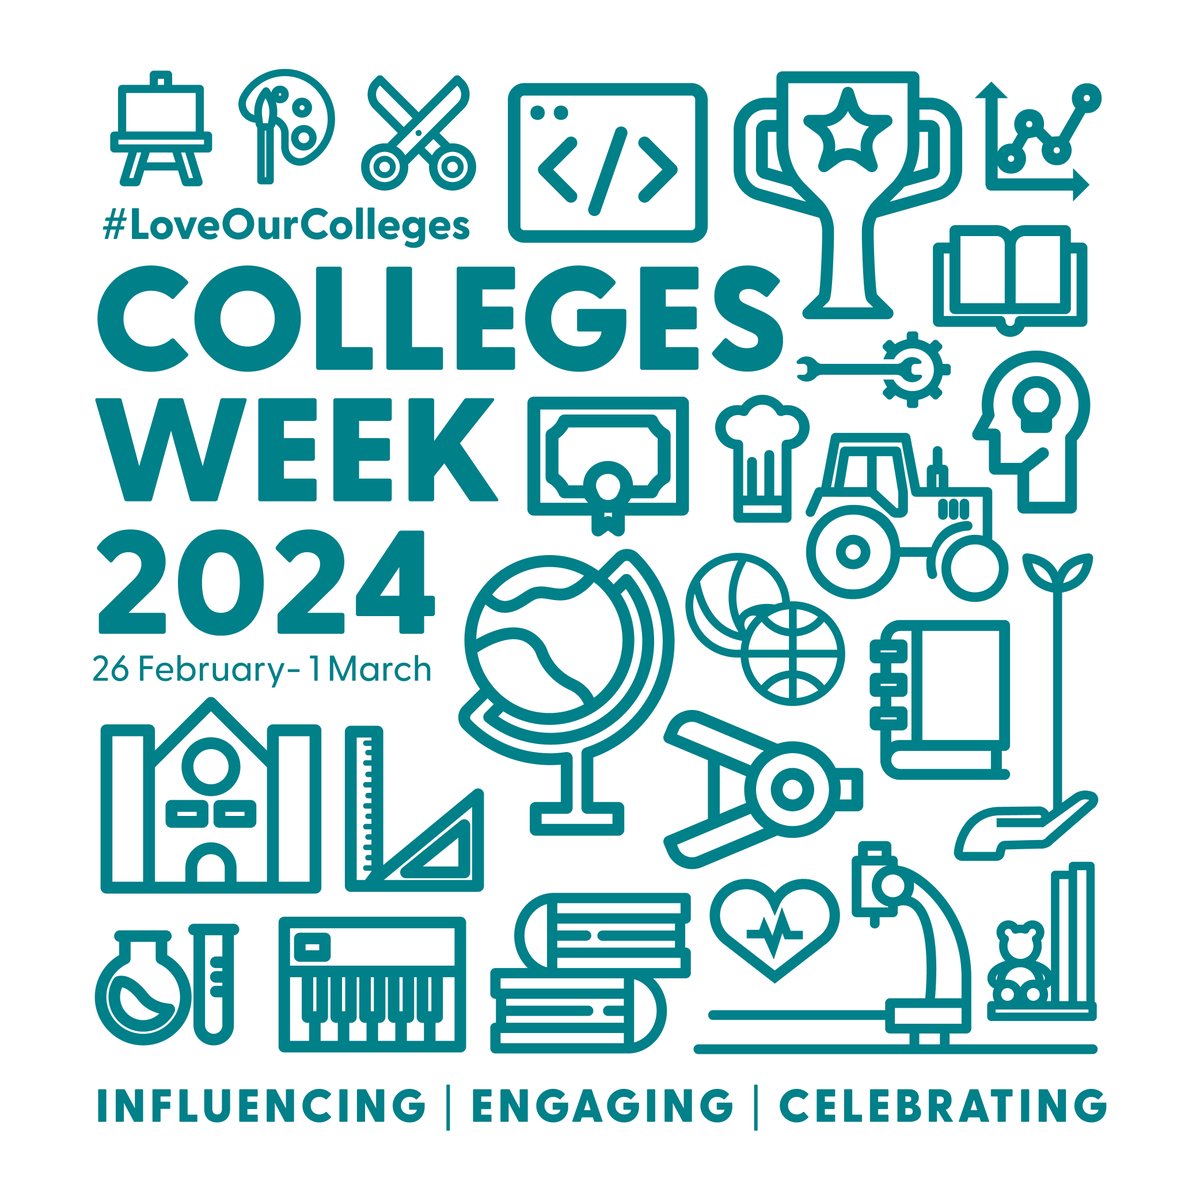 Colleges Week is taking place from Monday 26 February to Friday 1 March and we're focussing on influencing, engaging and celebrating ahead of this year’s elections. 👏

#CollegesWeek2024 #LoveOurColleges @AoC_info

Find out how to get involved: ow.ly/T9Oj50QIJT1